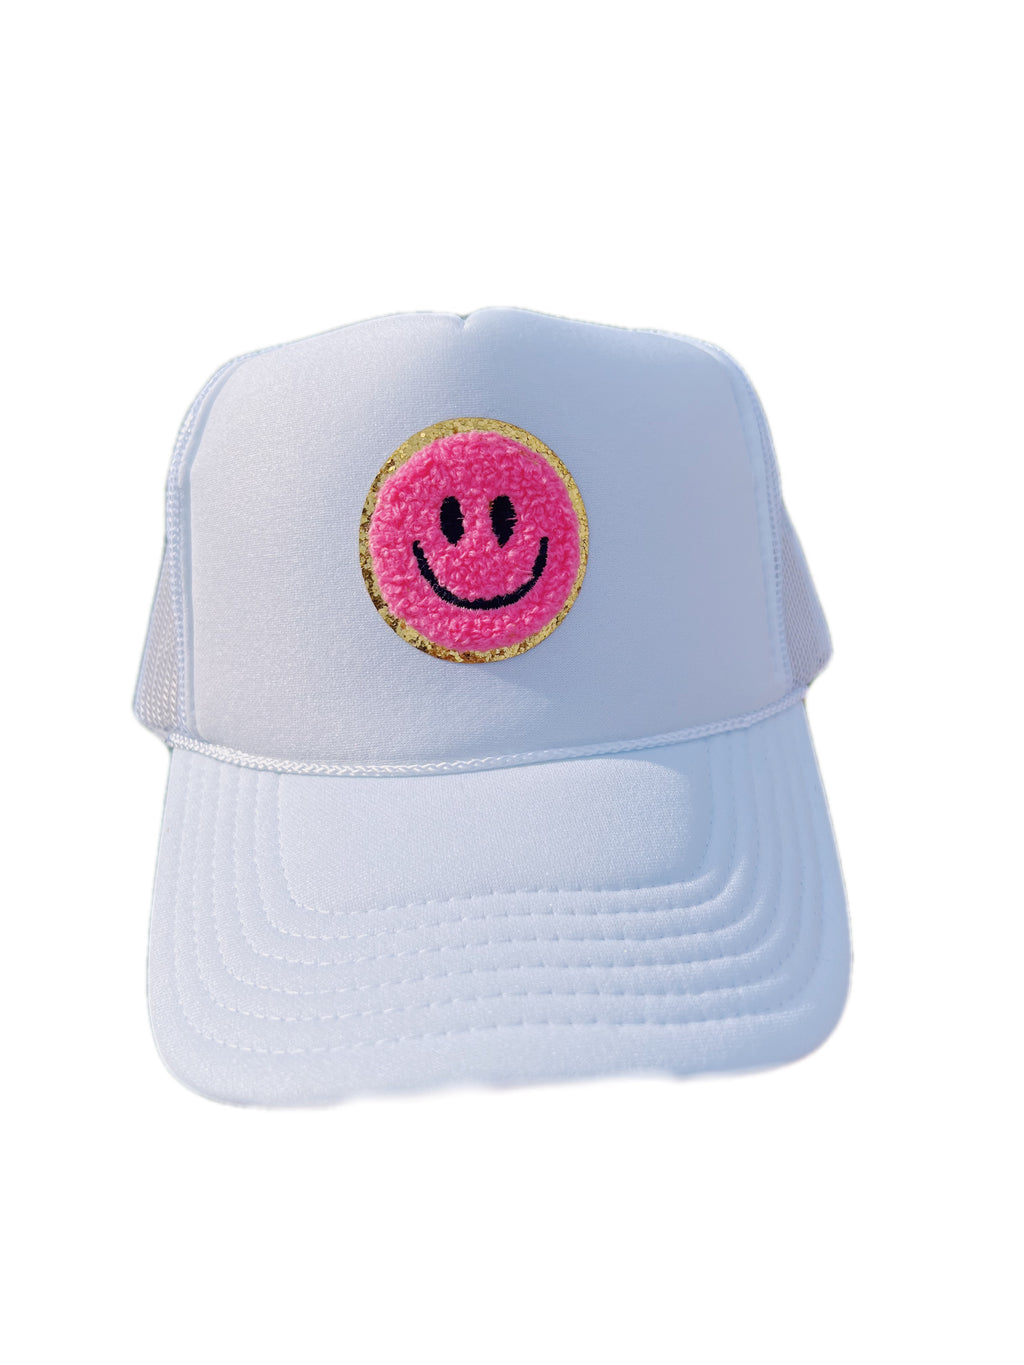 SMALL HOT PINK SMILEY ON WHITE TRUCKER HAT ☻